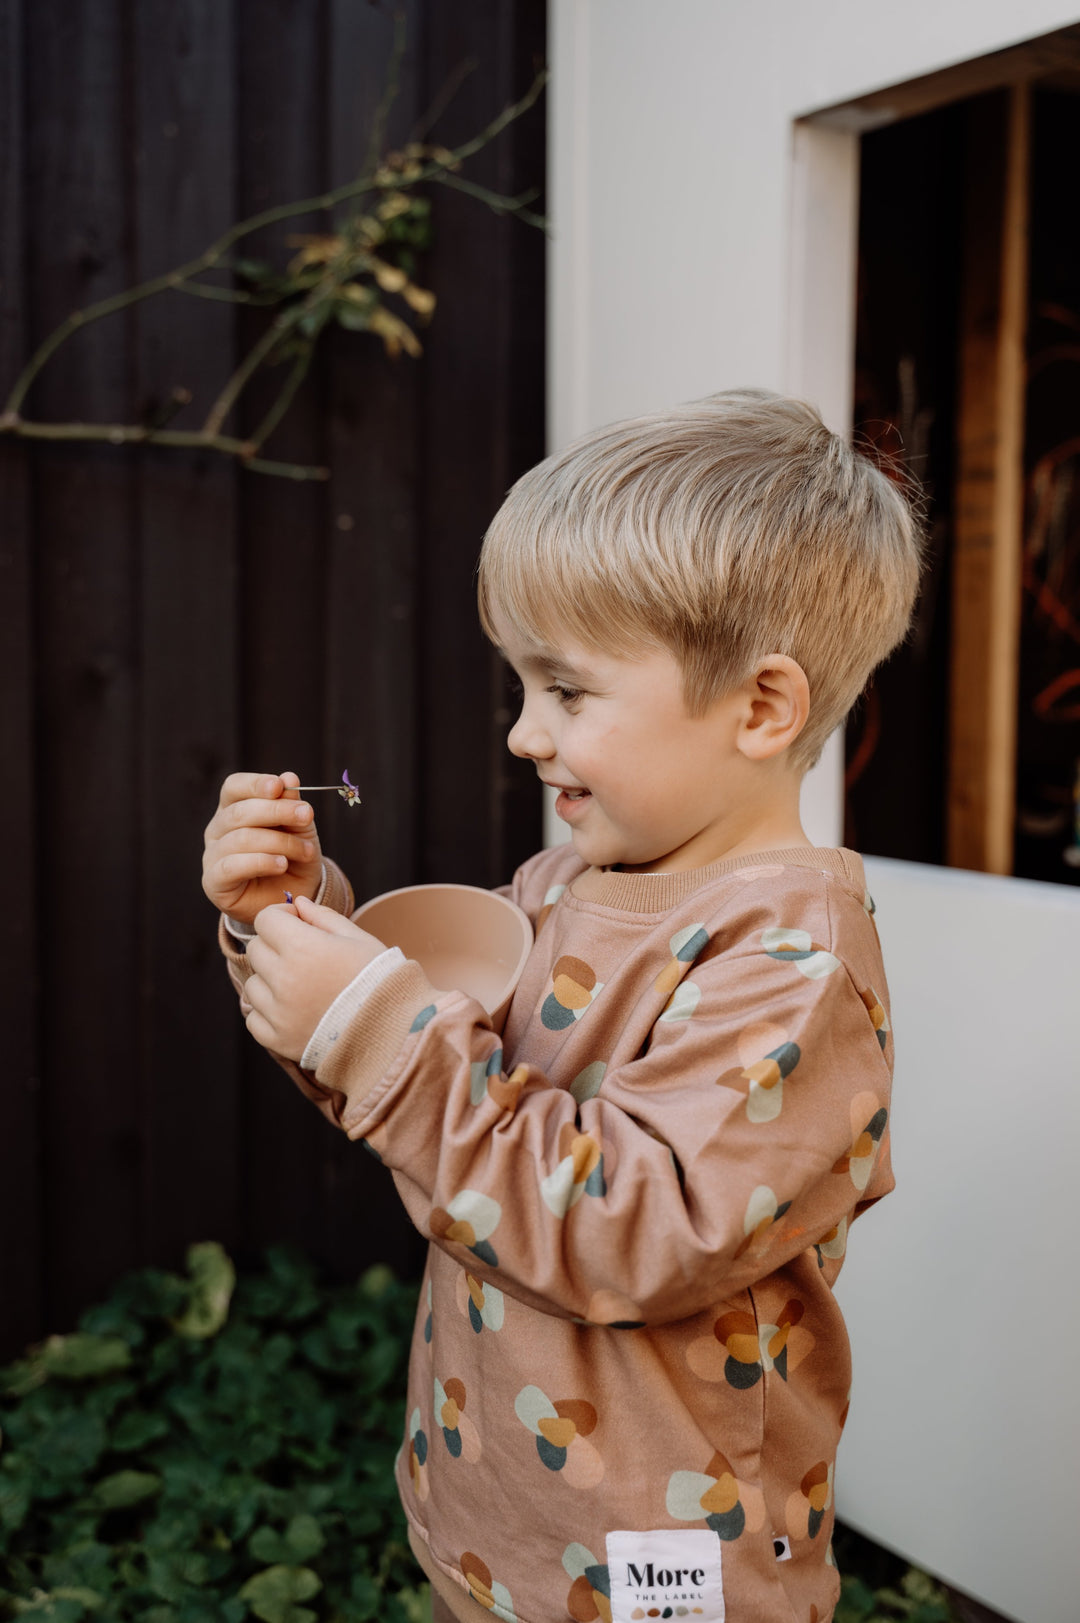 Photo of four year old child wearing More the label stone huddle jumper while playing with flowers.